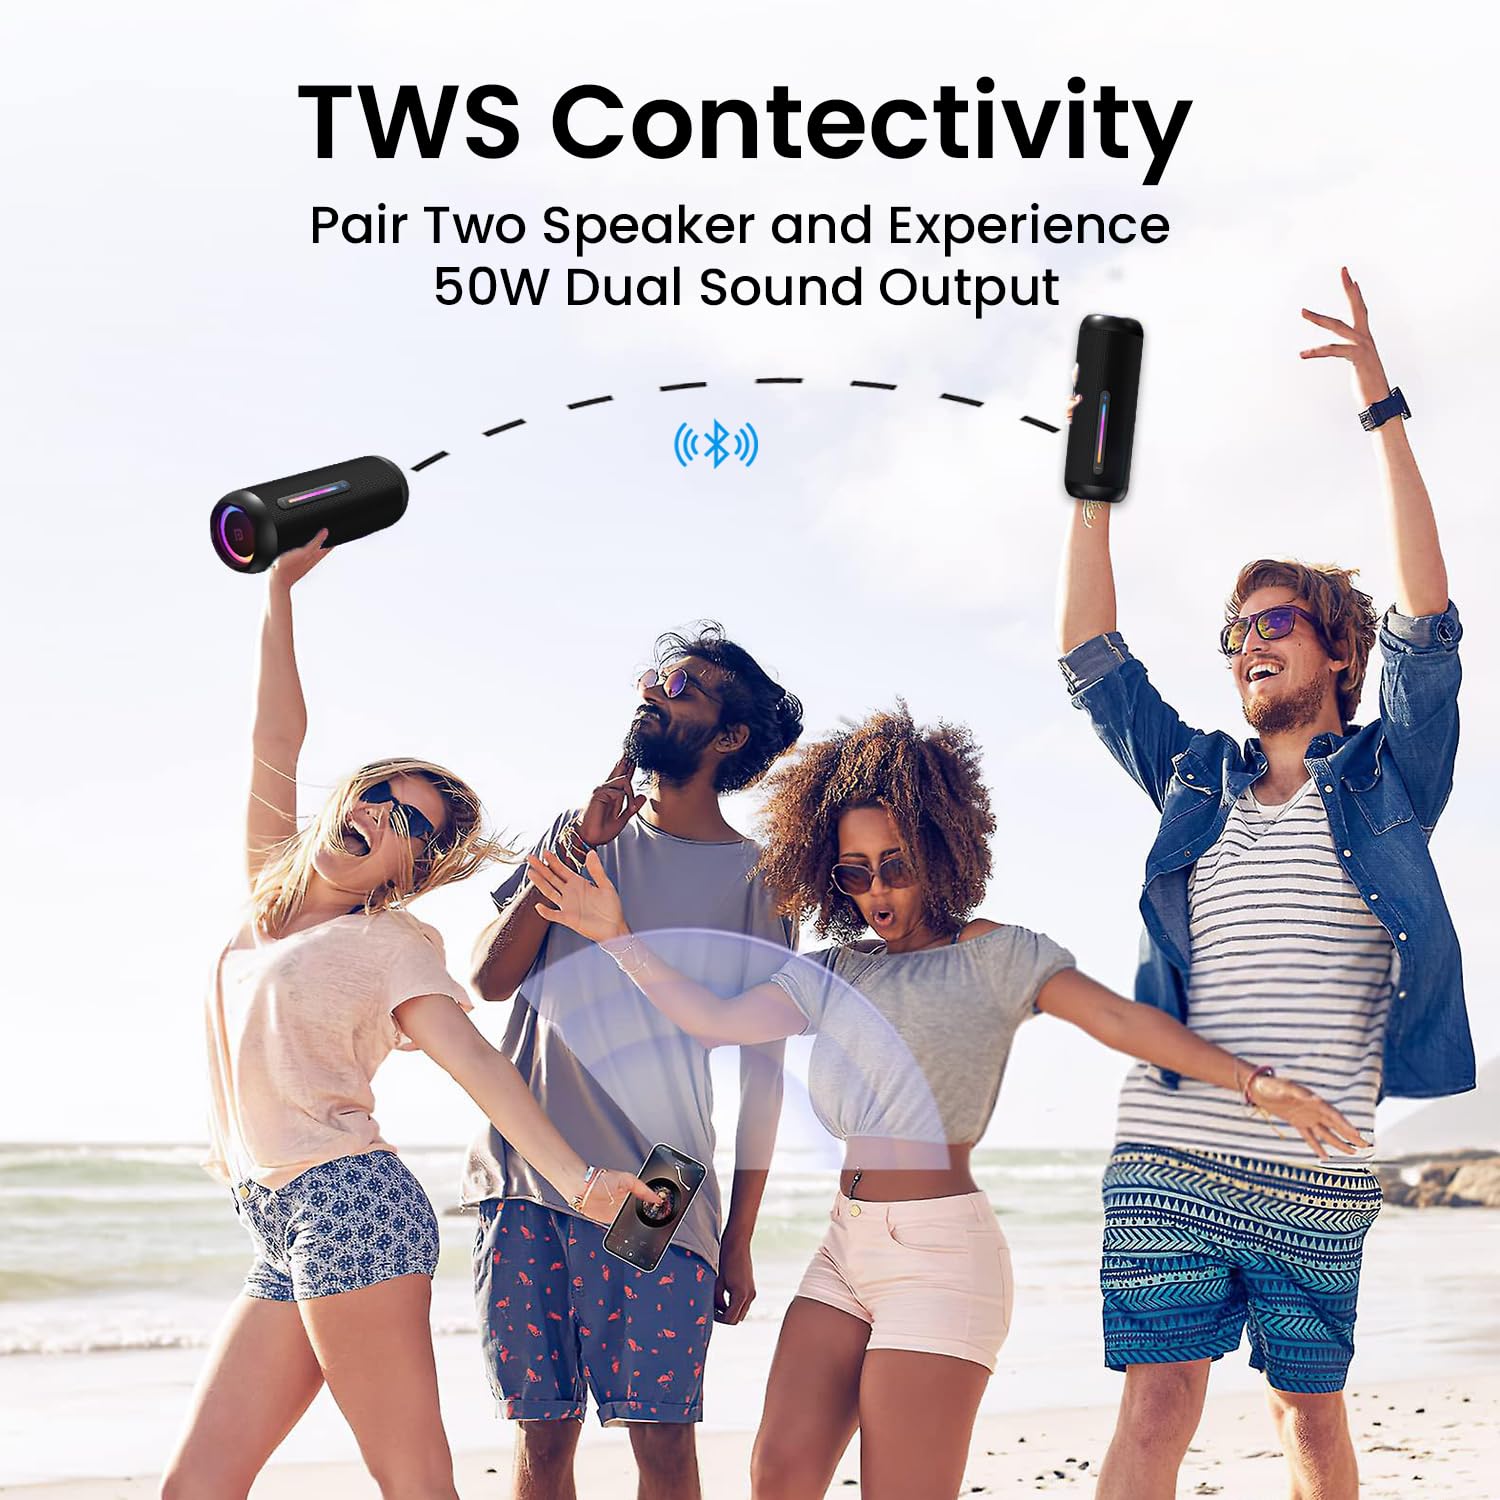 Portronics Breeze 5 25W Portable Wireless Bluetooth Speaker with in Built Mic,6 Hrs Playtime,RGB LEDs,TWS Mode,BT 5.3v,USB Drive,SD Card,AUX in,FM Radio,IPX5 Water Resistant,Type C Charging(Black)